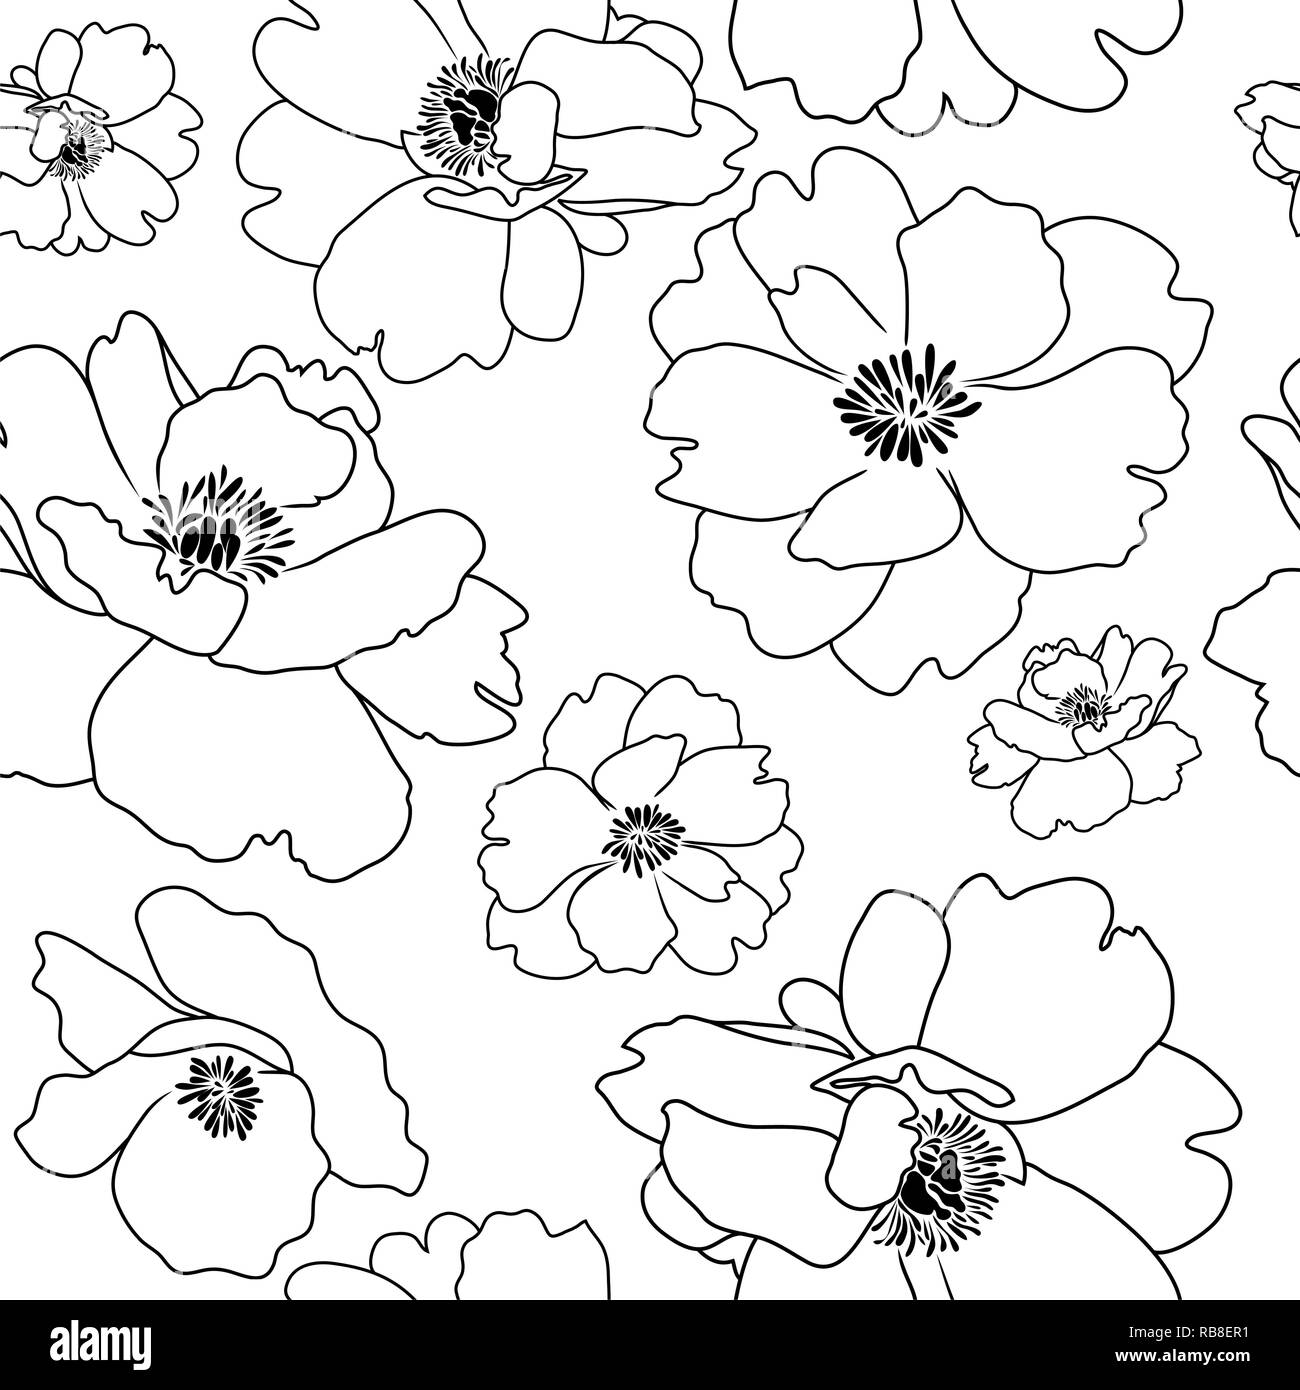 Cute Cartoon Flower Wallpaper, Flower Pattern, Floral Print, Flower Drawing  PNG and Vector with Transparent Background for Free Download